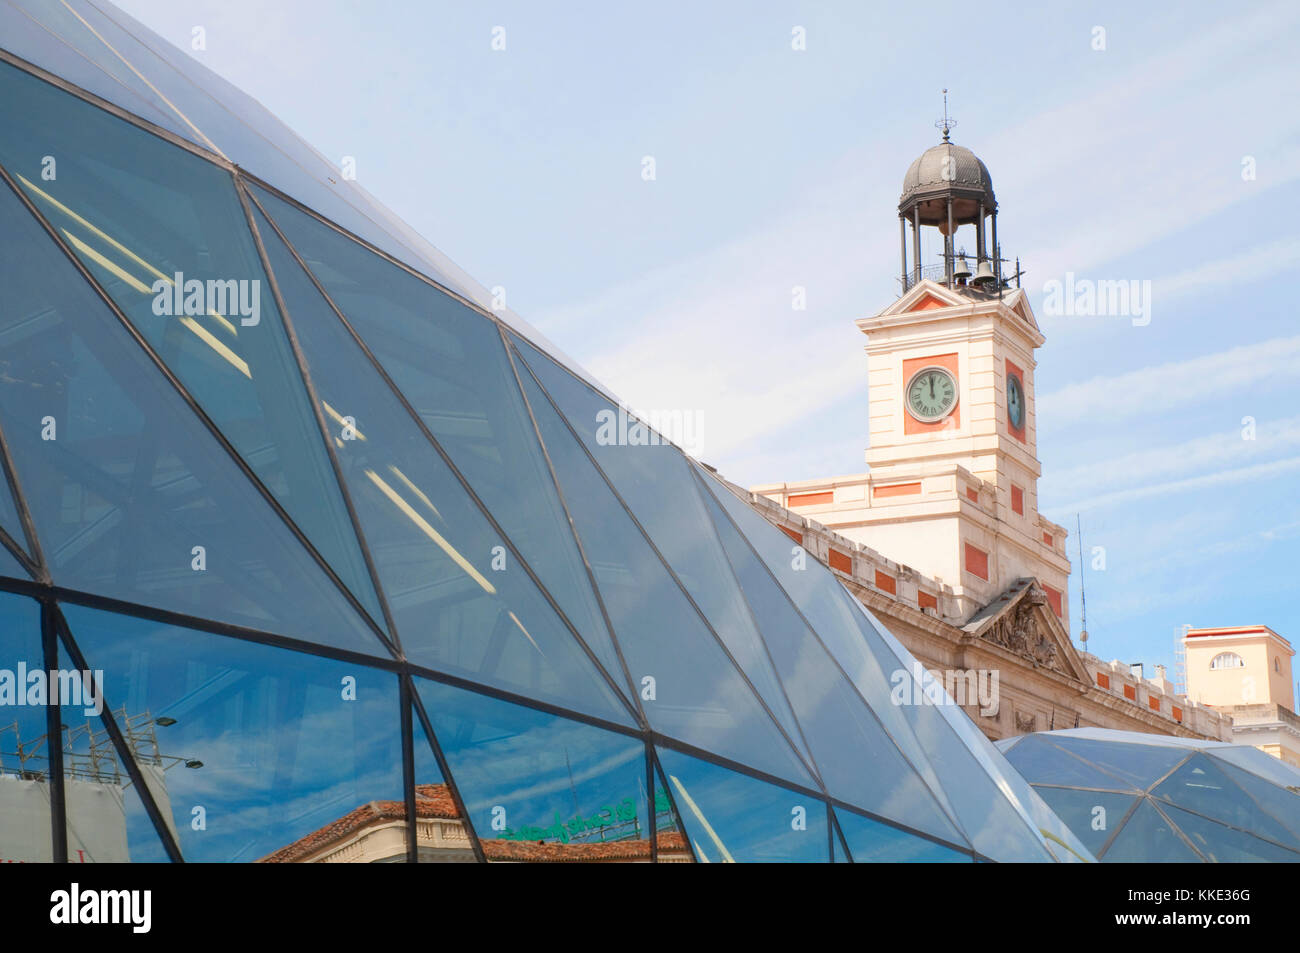 Cercanias station and clock tower. Puerta del Sol, Madrid, Spain. Stock Photo